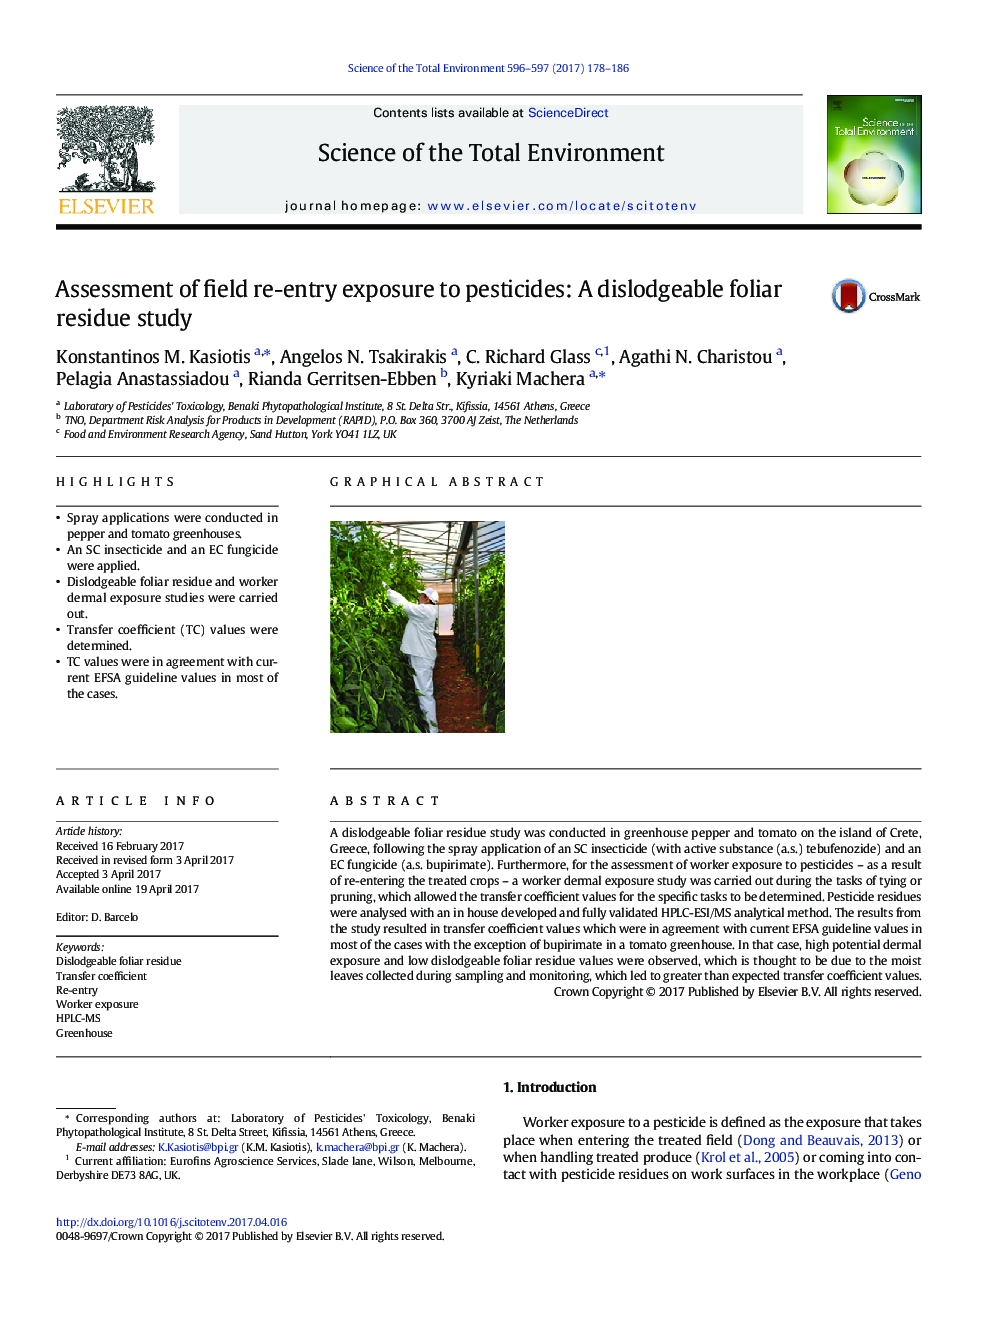 Assessment of field re-entry exposure to pesticides: A dislodgeable foliar residue study